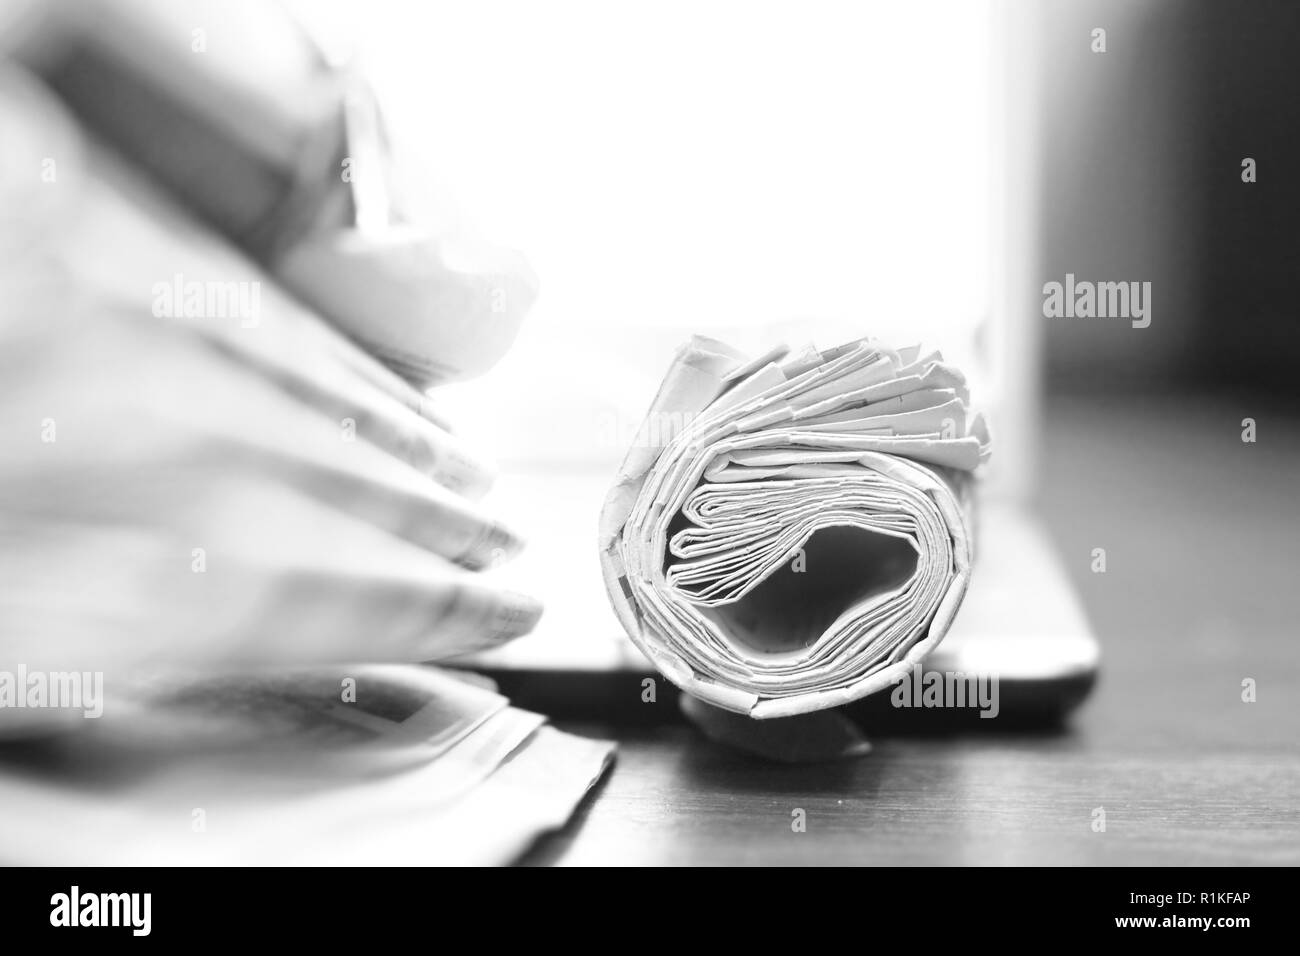 Blurred pile of newspapers with headlines, articles and rolled magazine on wooden table with light background for text (copy space), concept for news Stock Photo